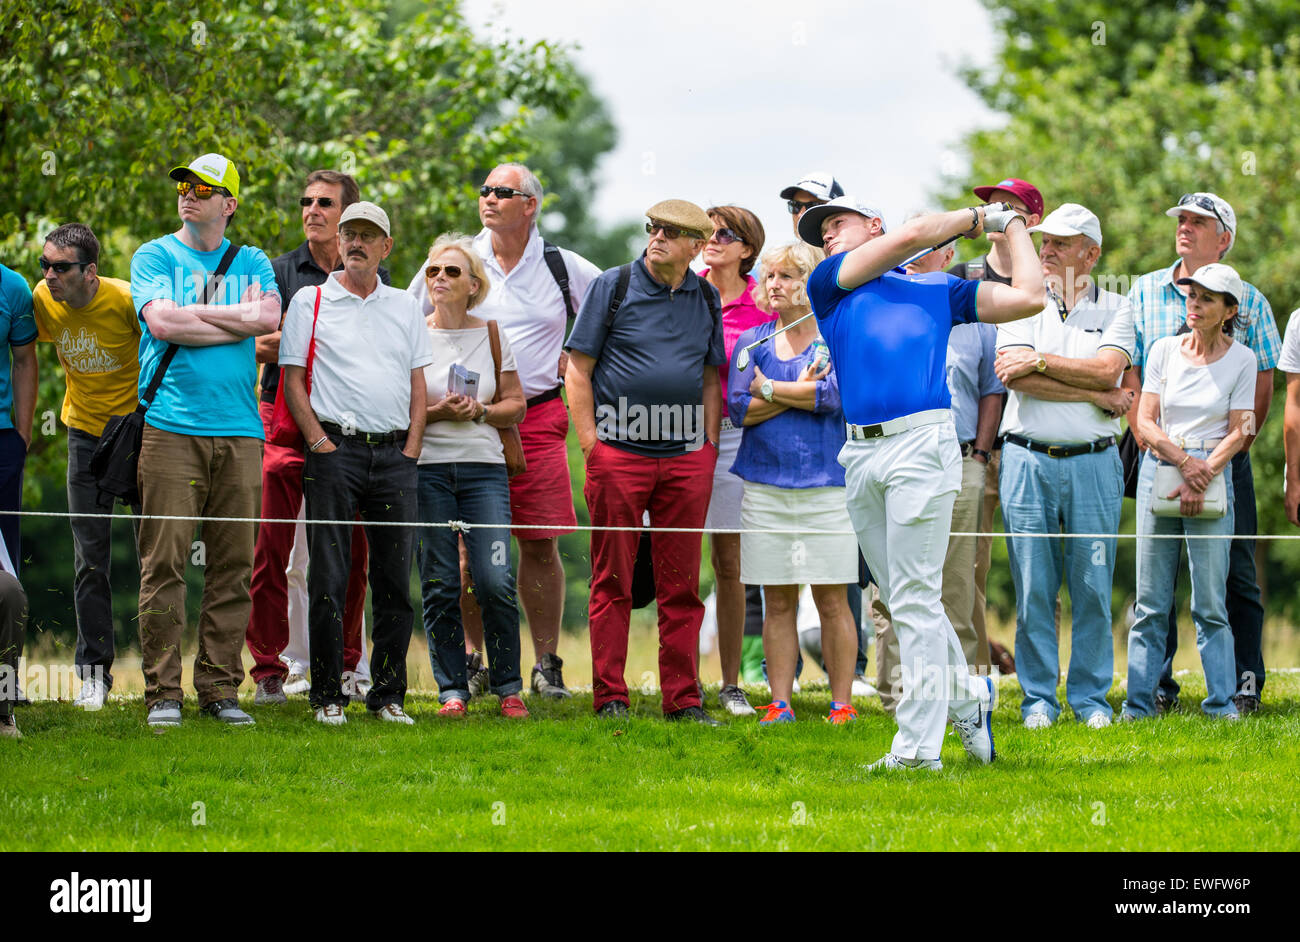 Eichenried, Germany. 25th June, 2015. Thorbjorn Olesen of Denmark in action at the European Tour golf tournament in Eichenried, Germany, 25 June 2015. Photo: MARC MUELLER/dpa/Alamy Live News Stock Photo